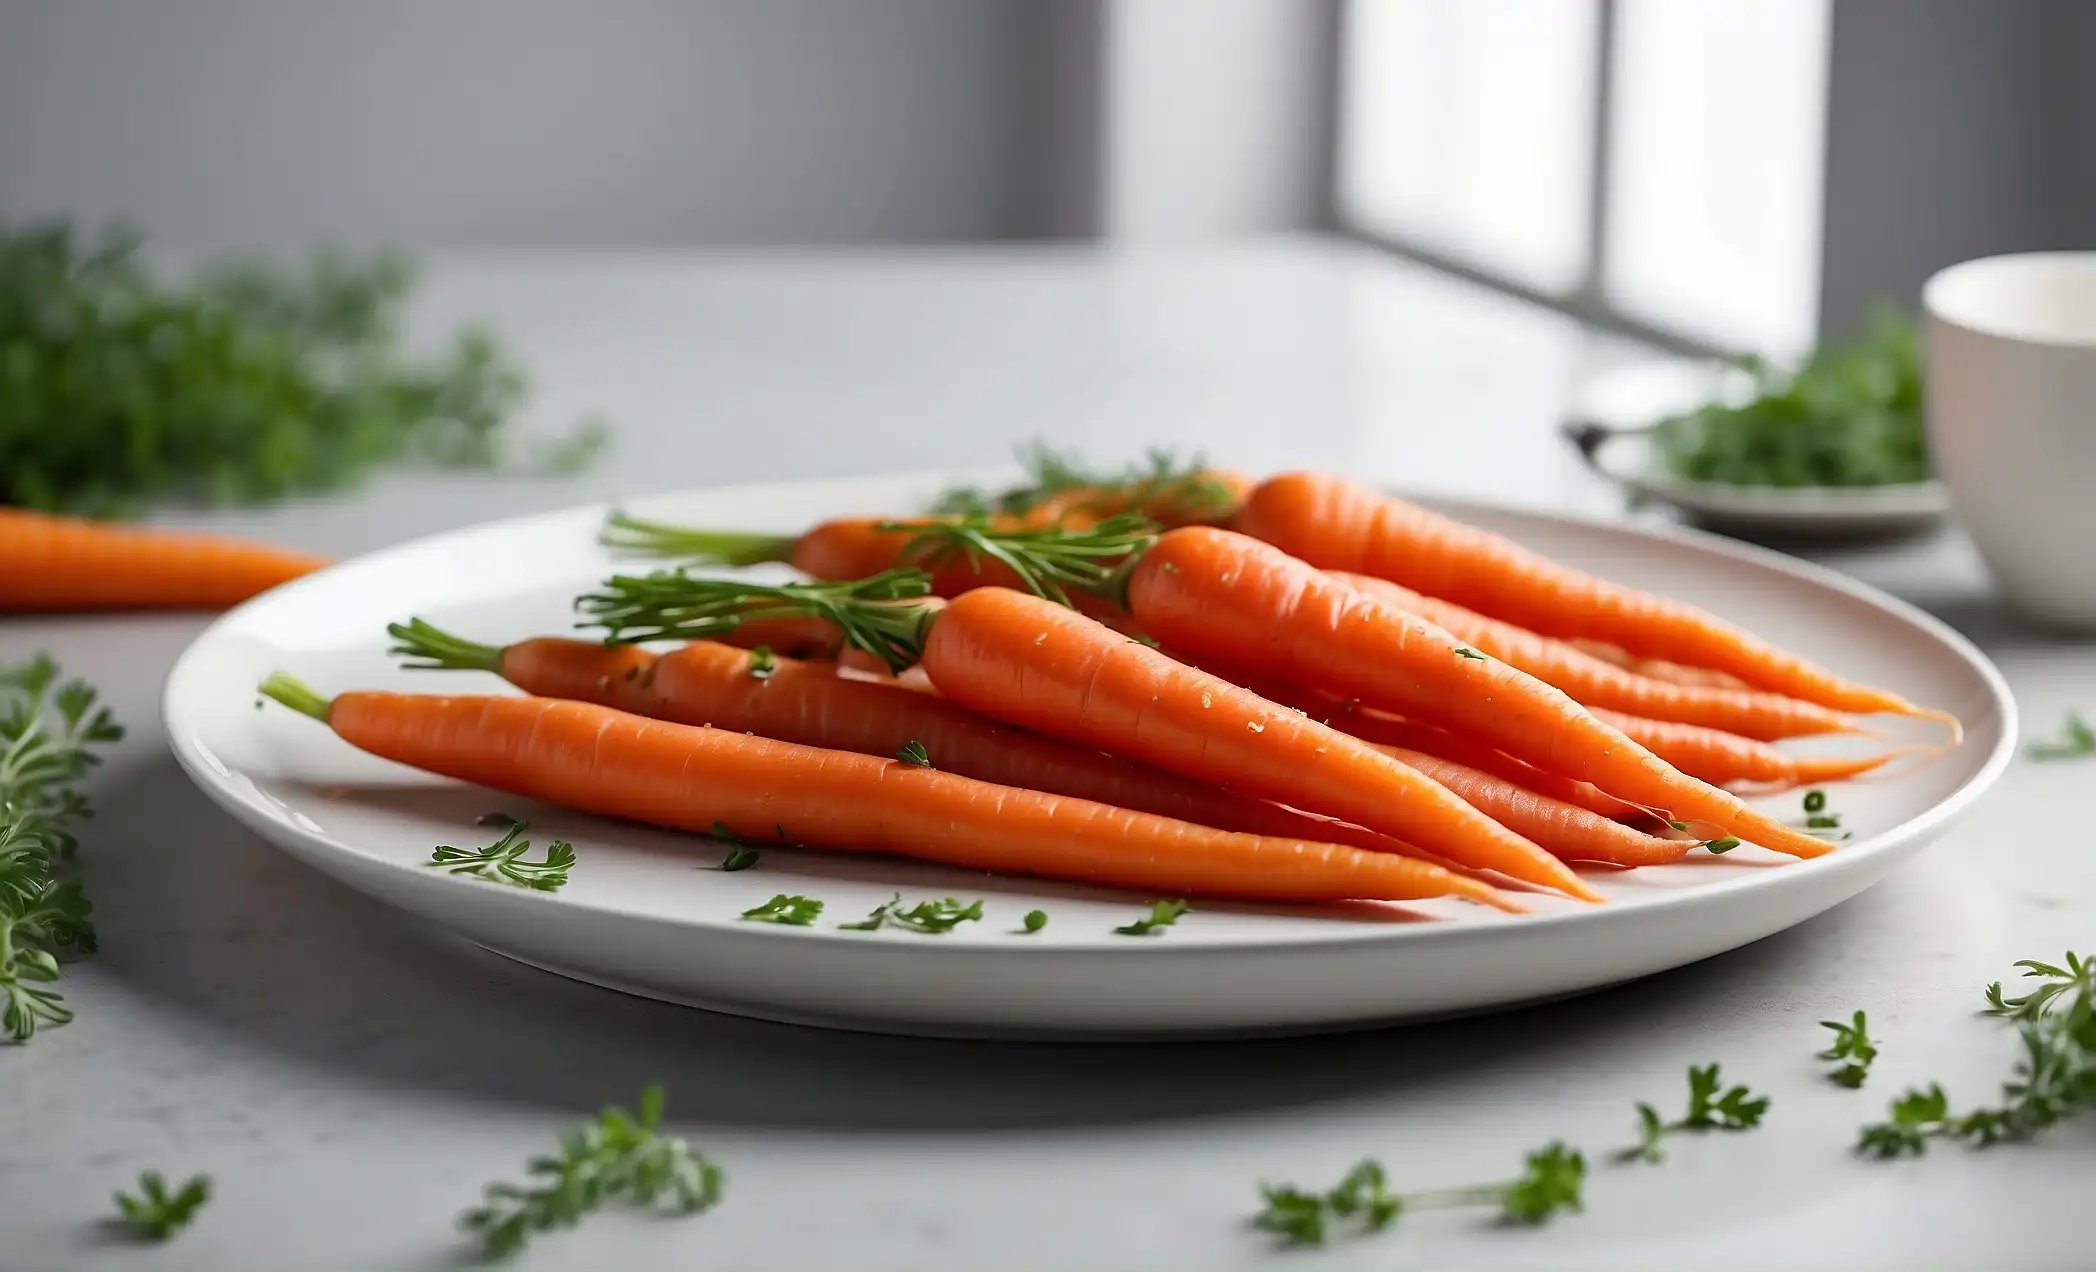 How to Caramelize Carrots Without Sugar